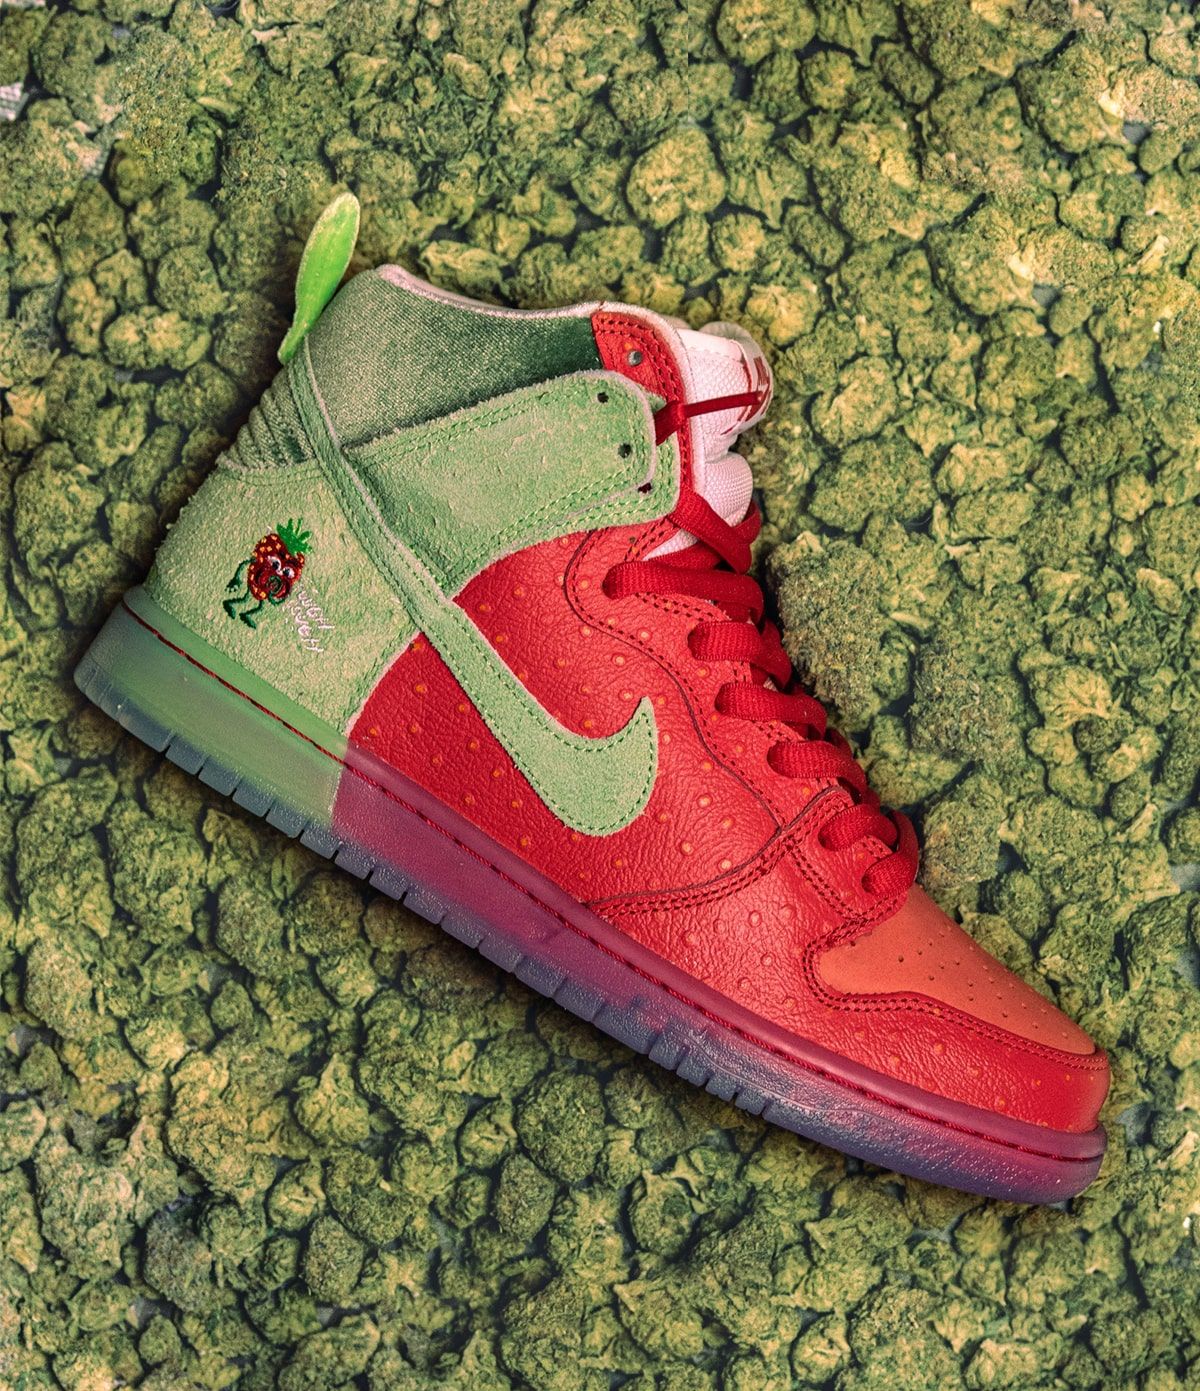 Where to Buy the Nike SB Dunk High “Strawberry Cough” | House of Heat°